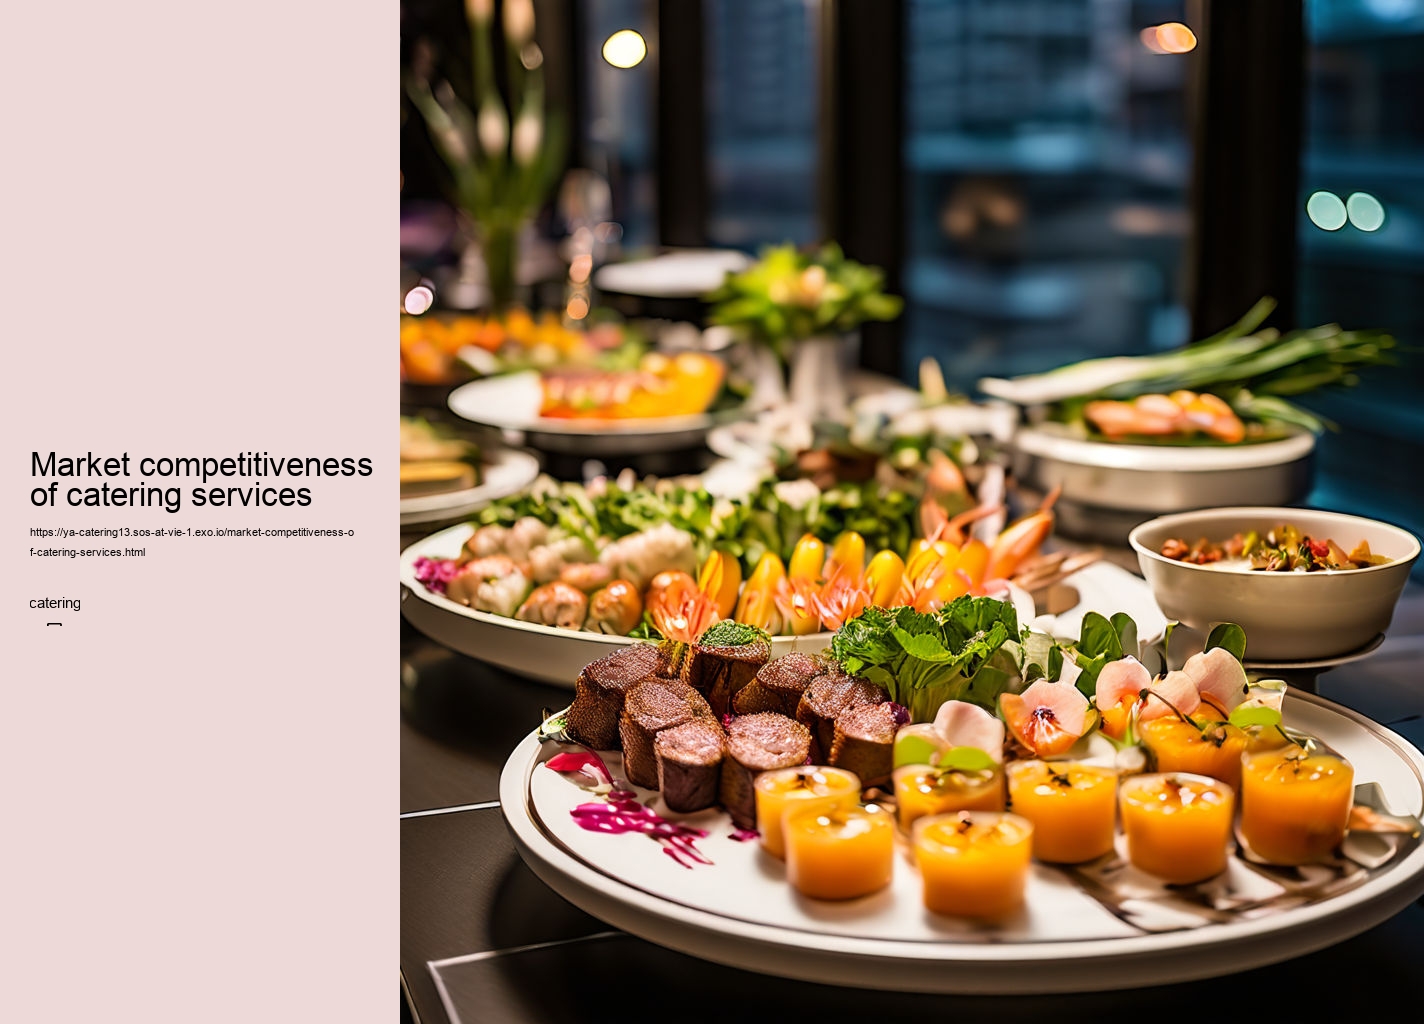 Market competitiveness of catering services